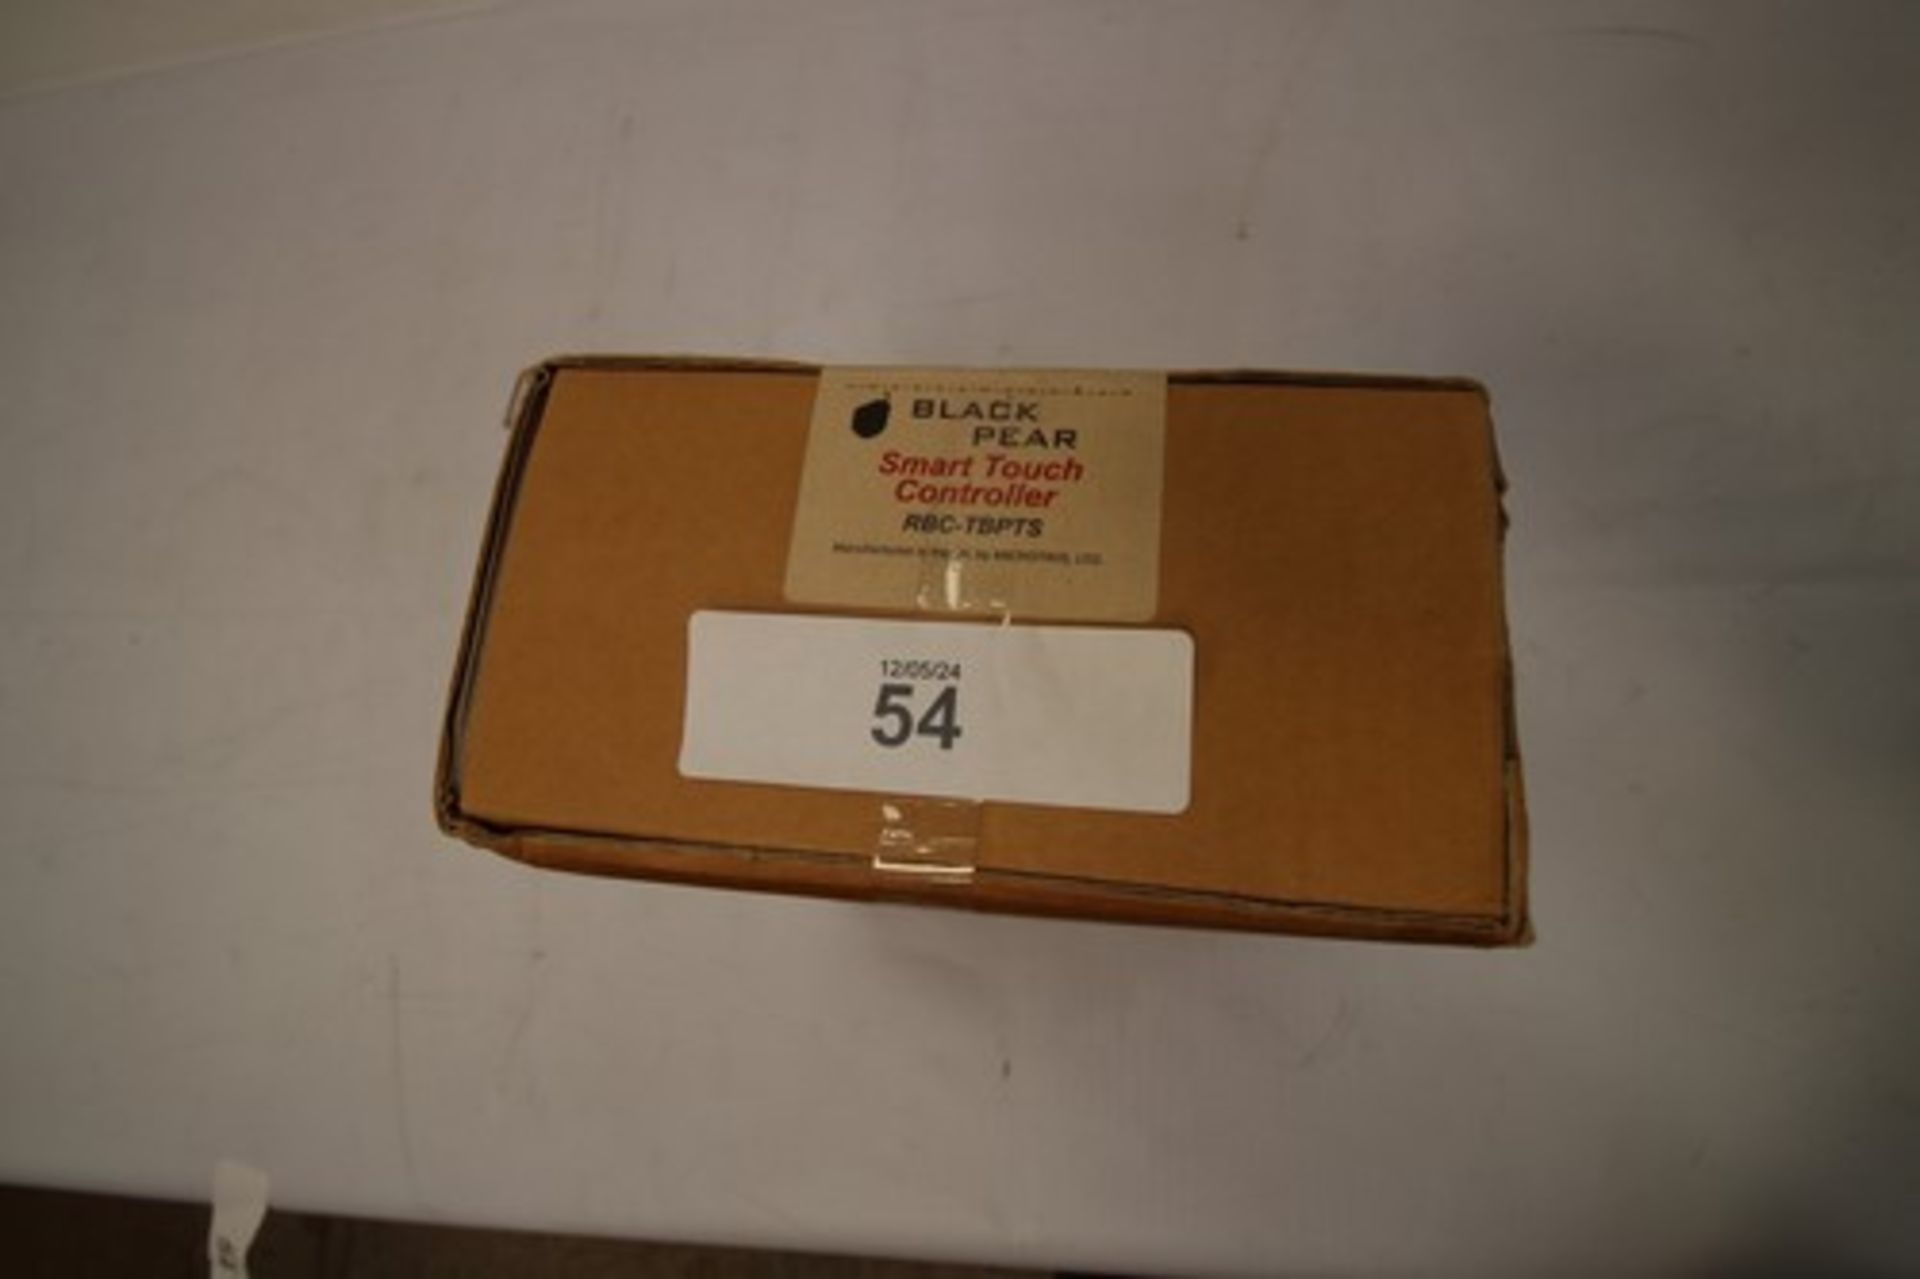 1 x Toshiba Black Pear smart touch Air conditioning controller, model No: RBC-TBPTS - sealed new - Image 2 of 2